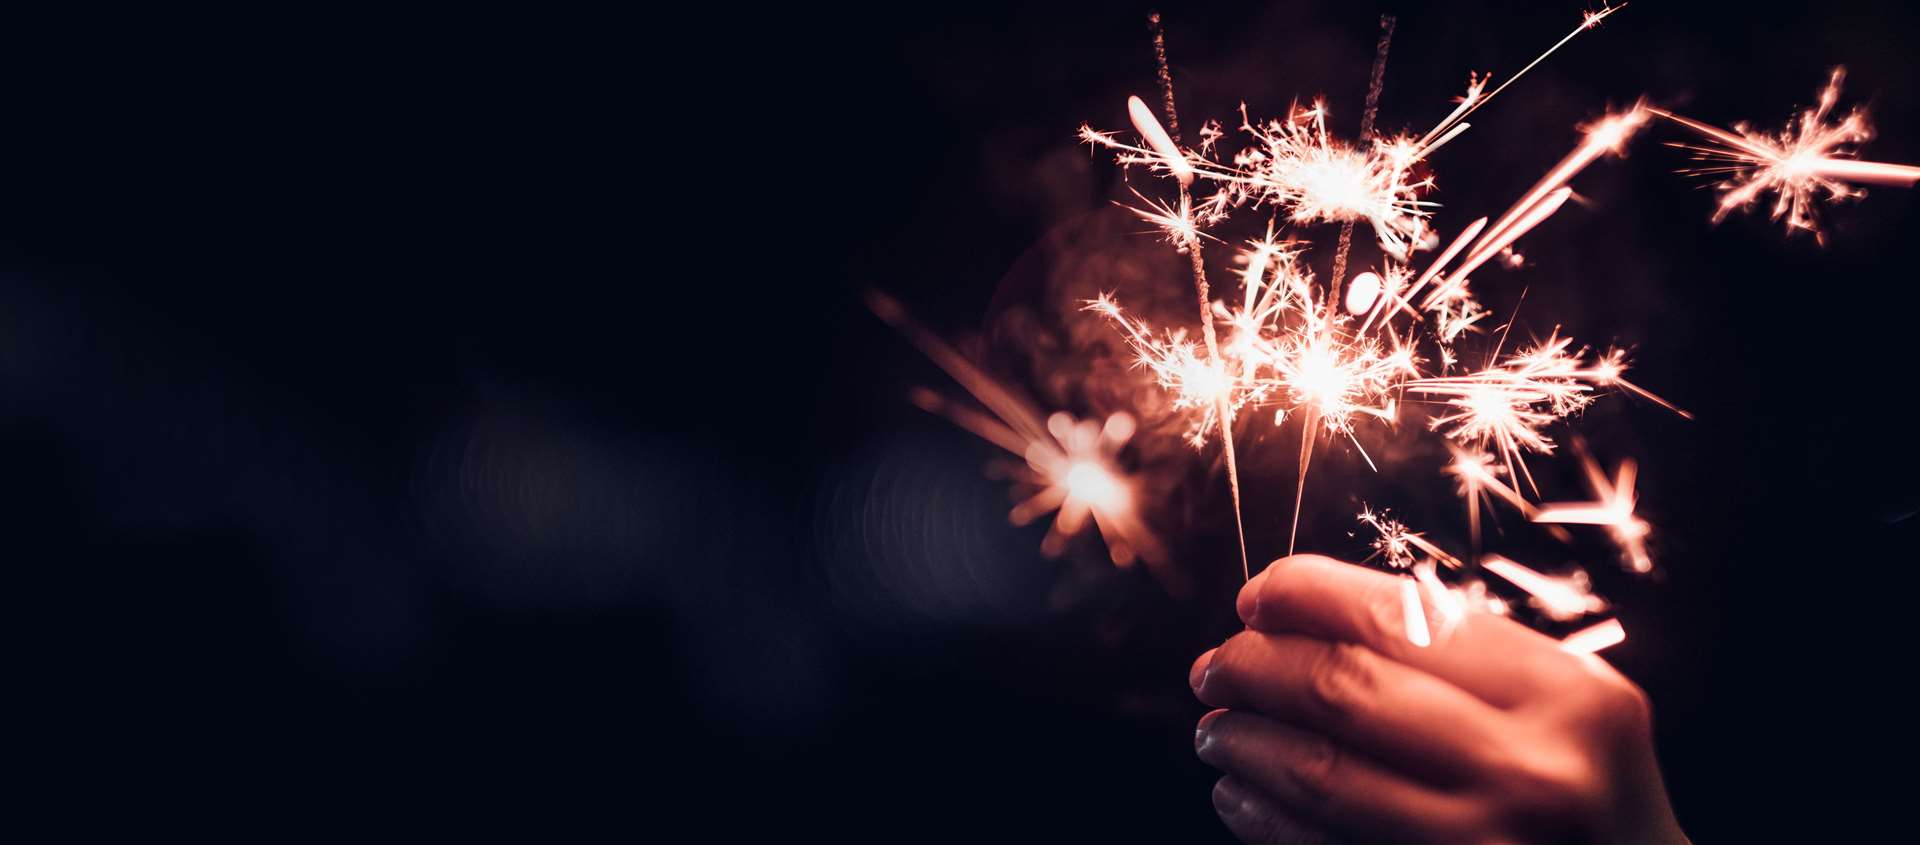 Sparklers will be the order of the day. Stock image